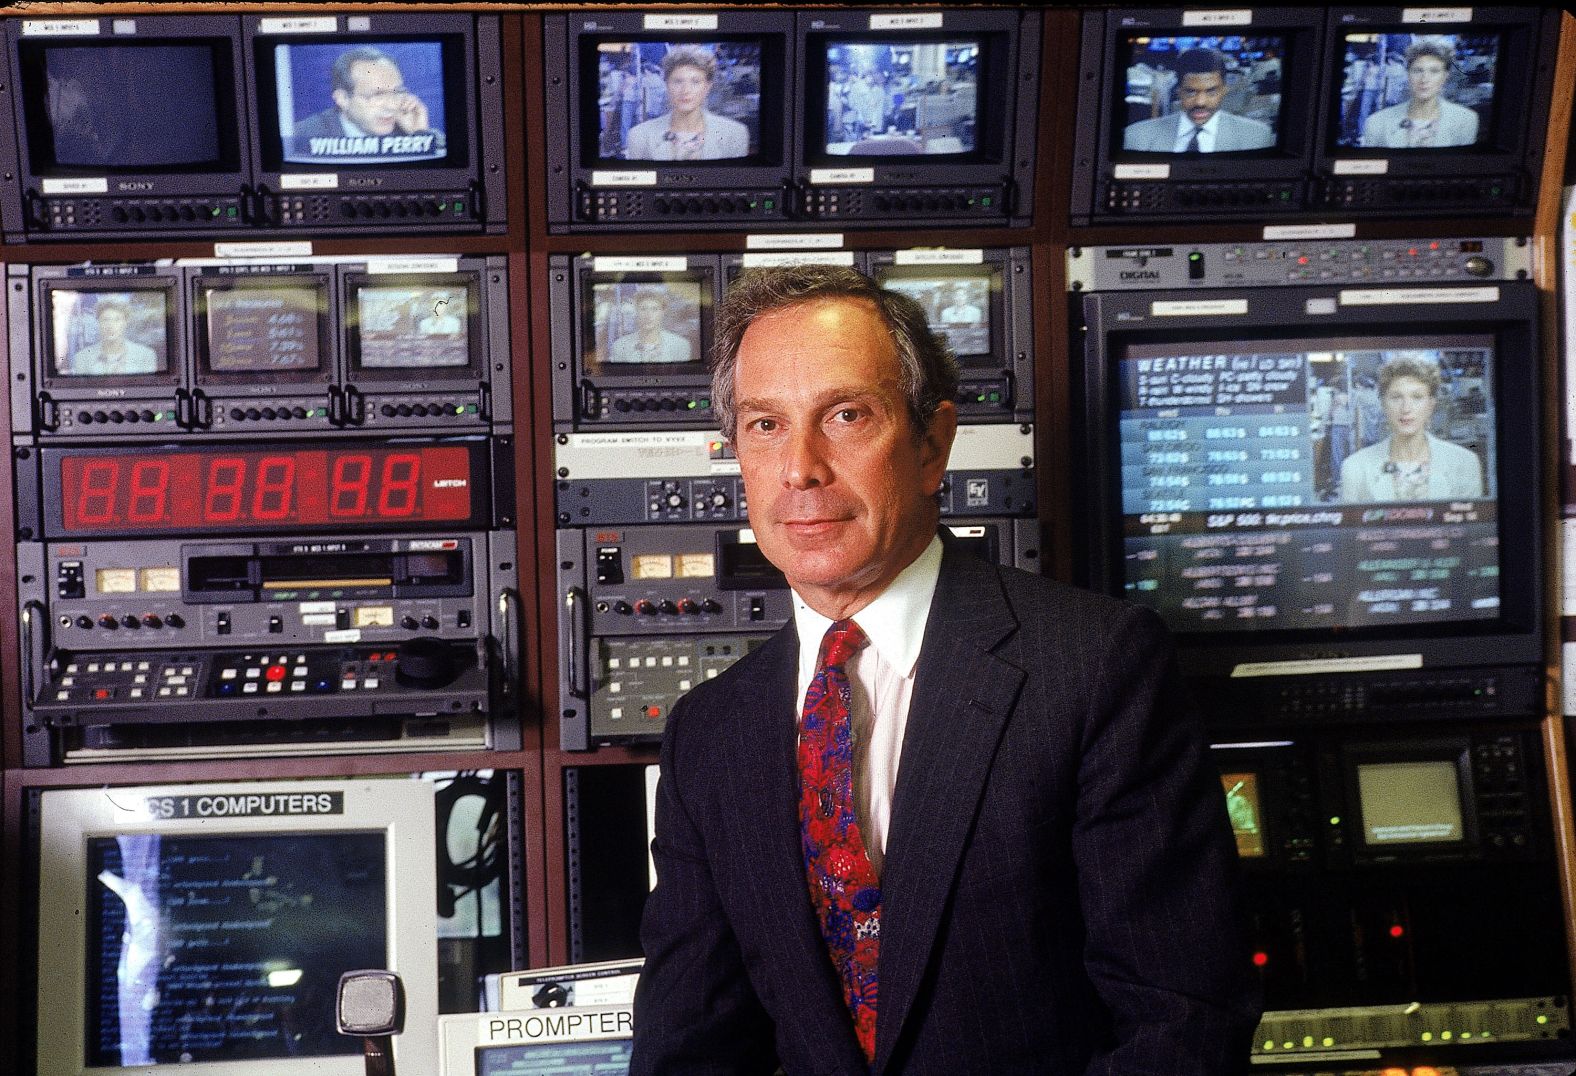 Bloomberg poses for a portrait at his company's television studios in 1994. He created technology that bankers and traders use to access market data.